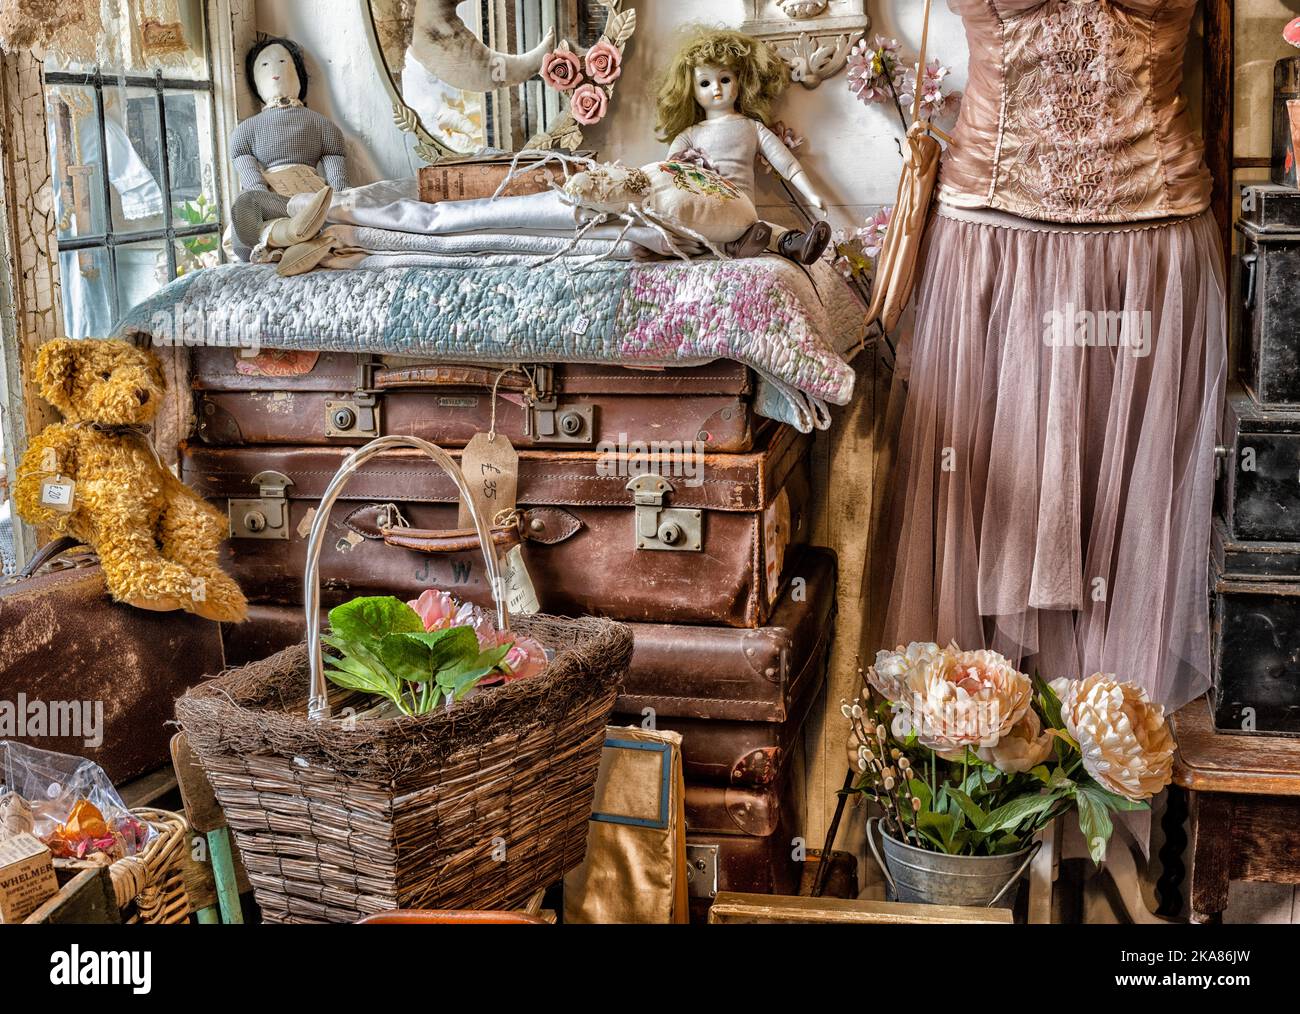 Interior view of antique shop showing antiques, bric-a-brac and collectables for sale. Stock Photo